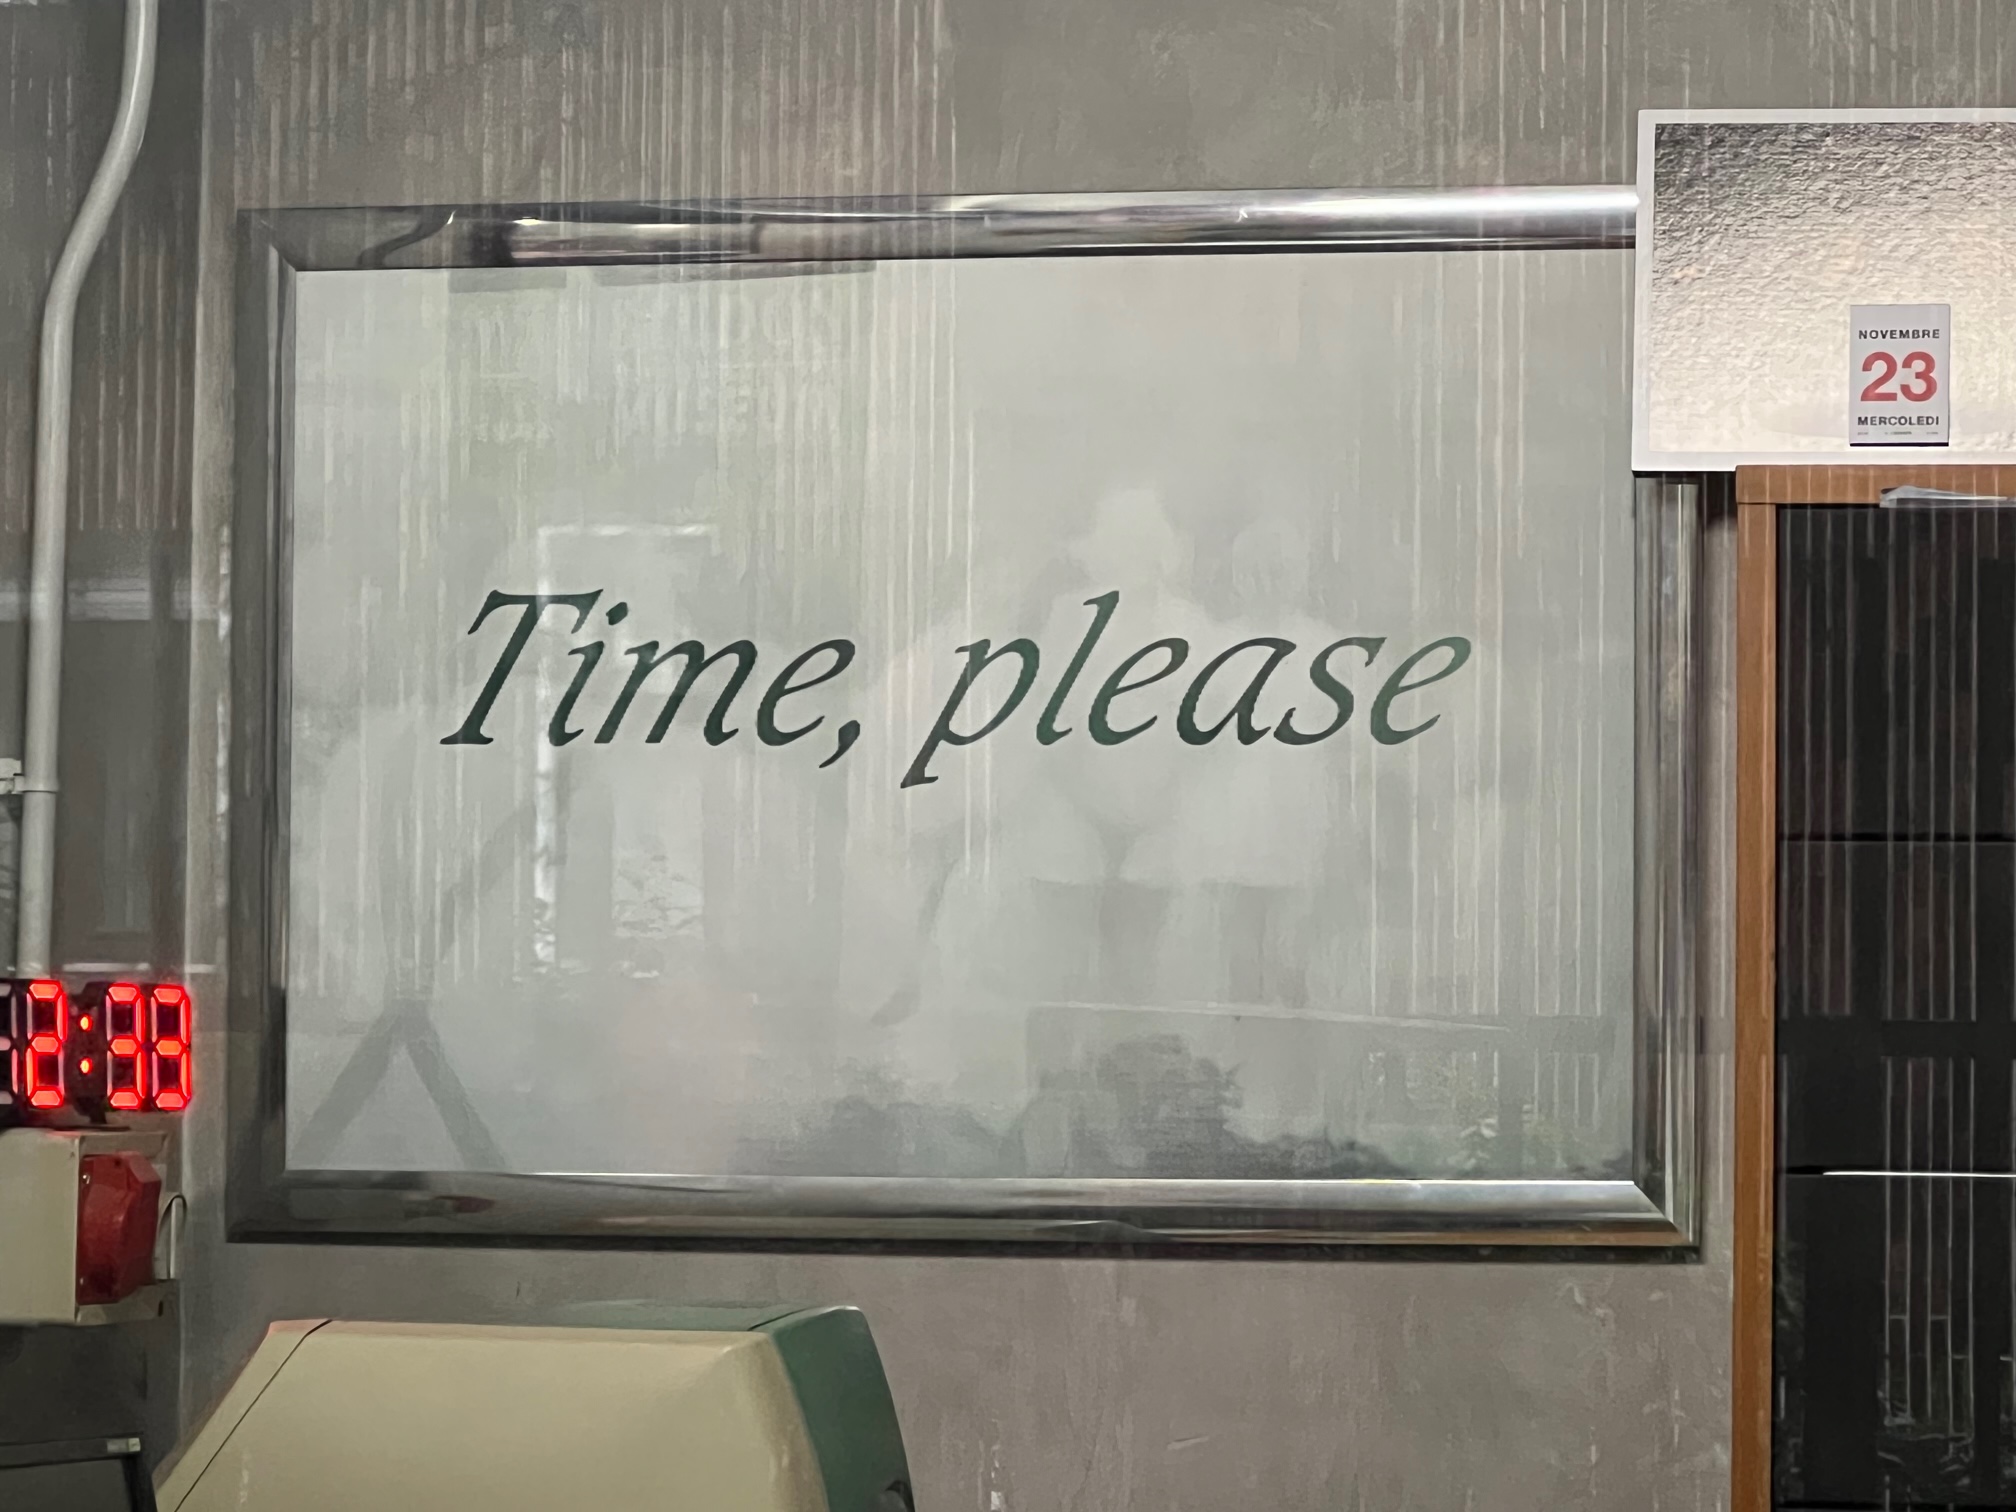 Time, please